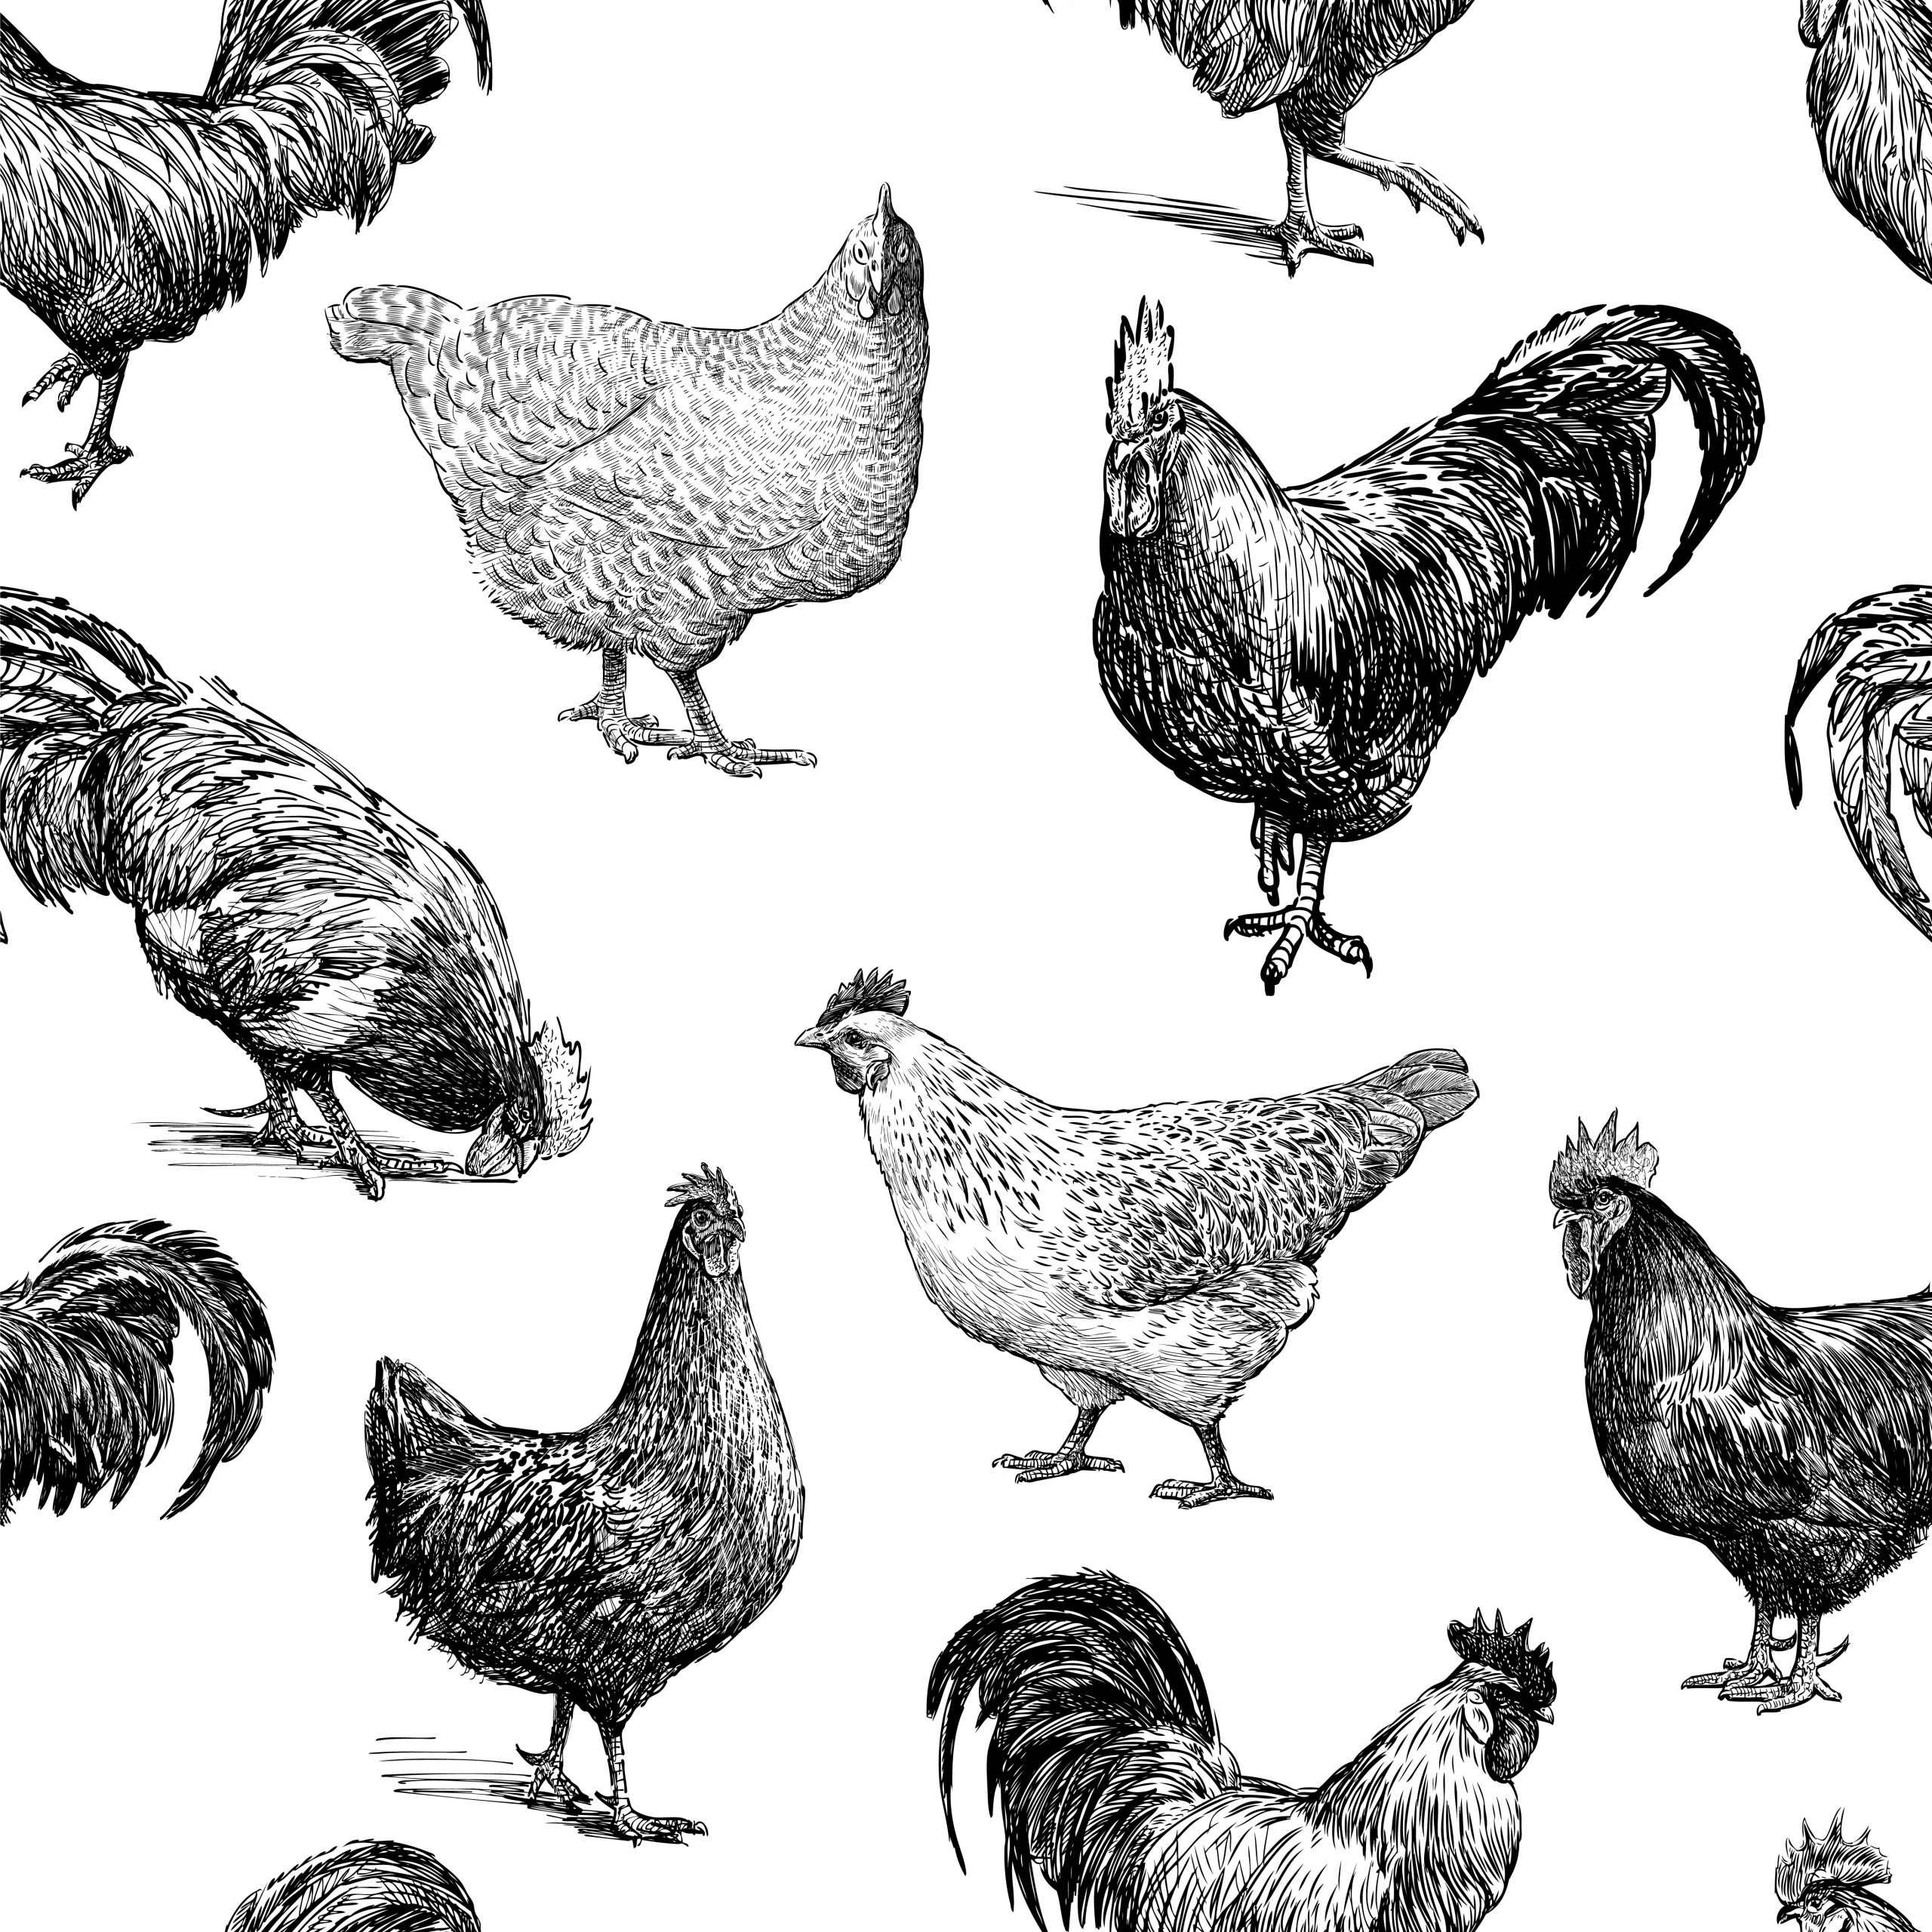 Sketches of different kinds of roosters and hens.